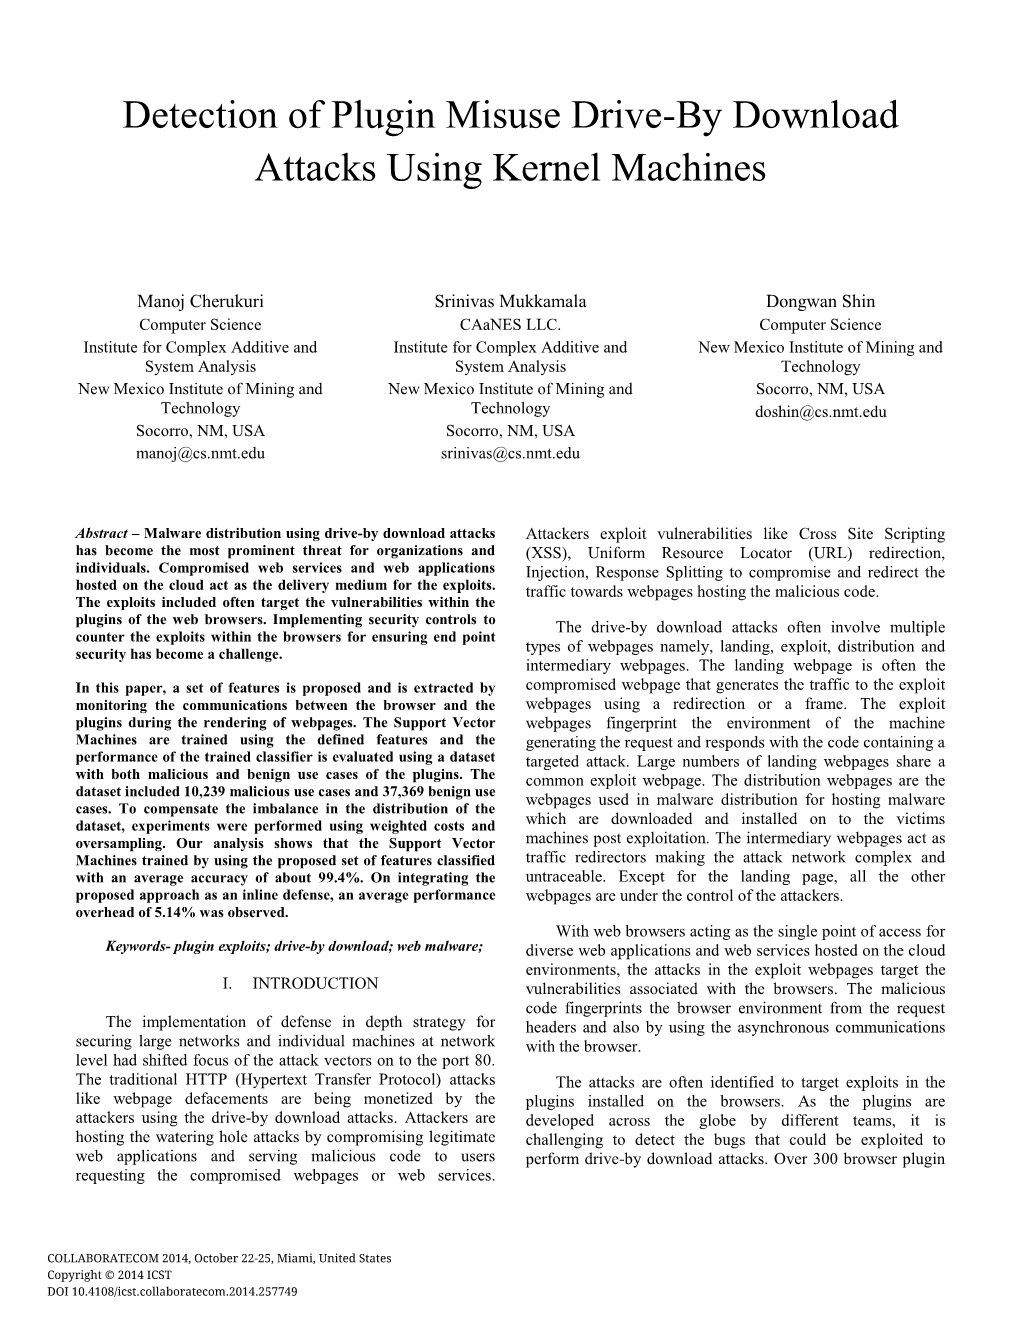 Detection of Plugin Misuse Drive-By Download Attacks Using Kernel Machines